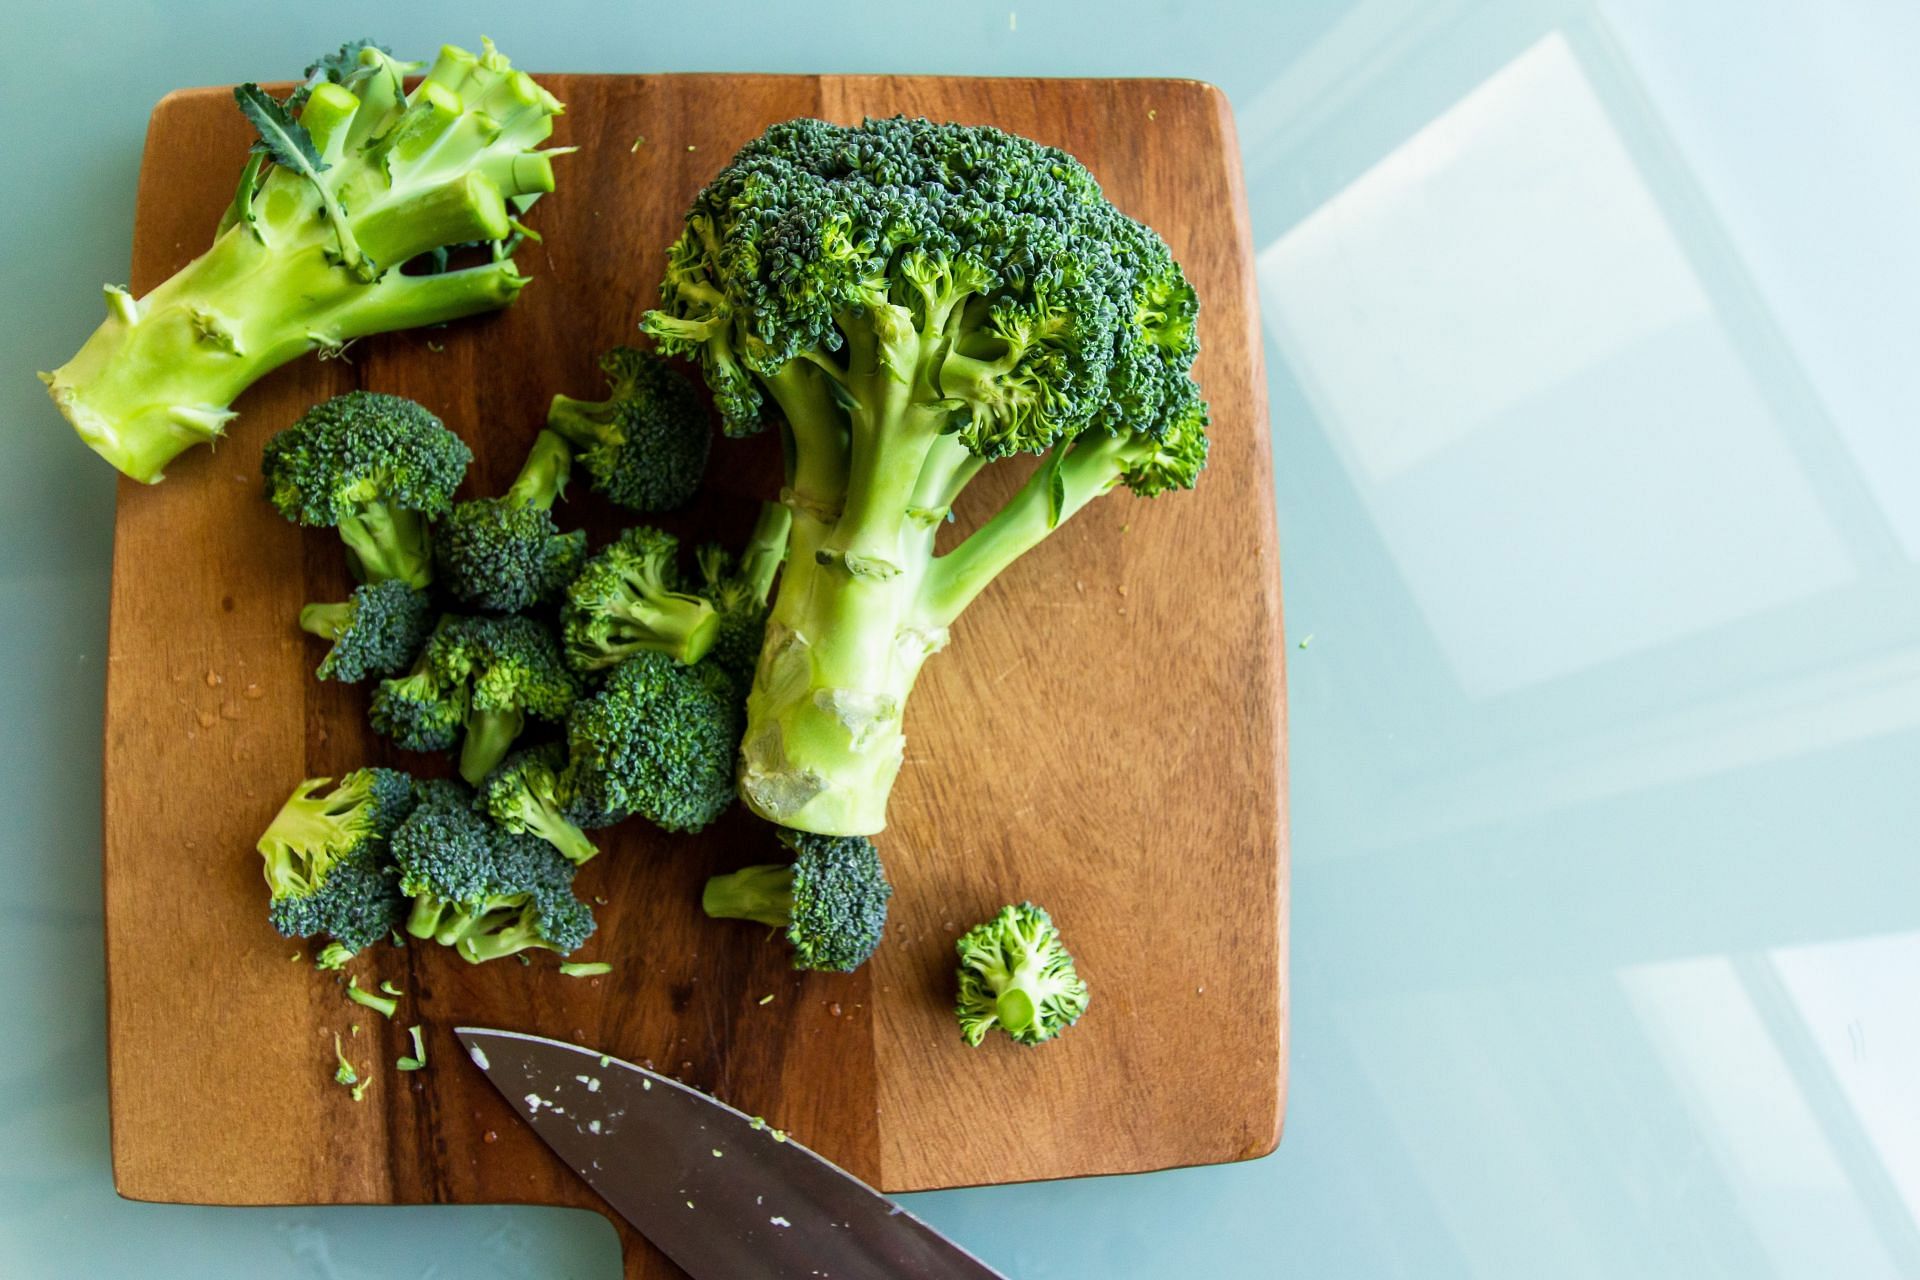 Broccoli can also aid in weight loss. (Image via Unsplash/Louis Hansel)